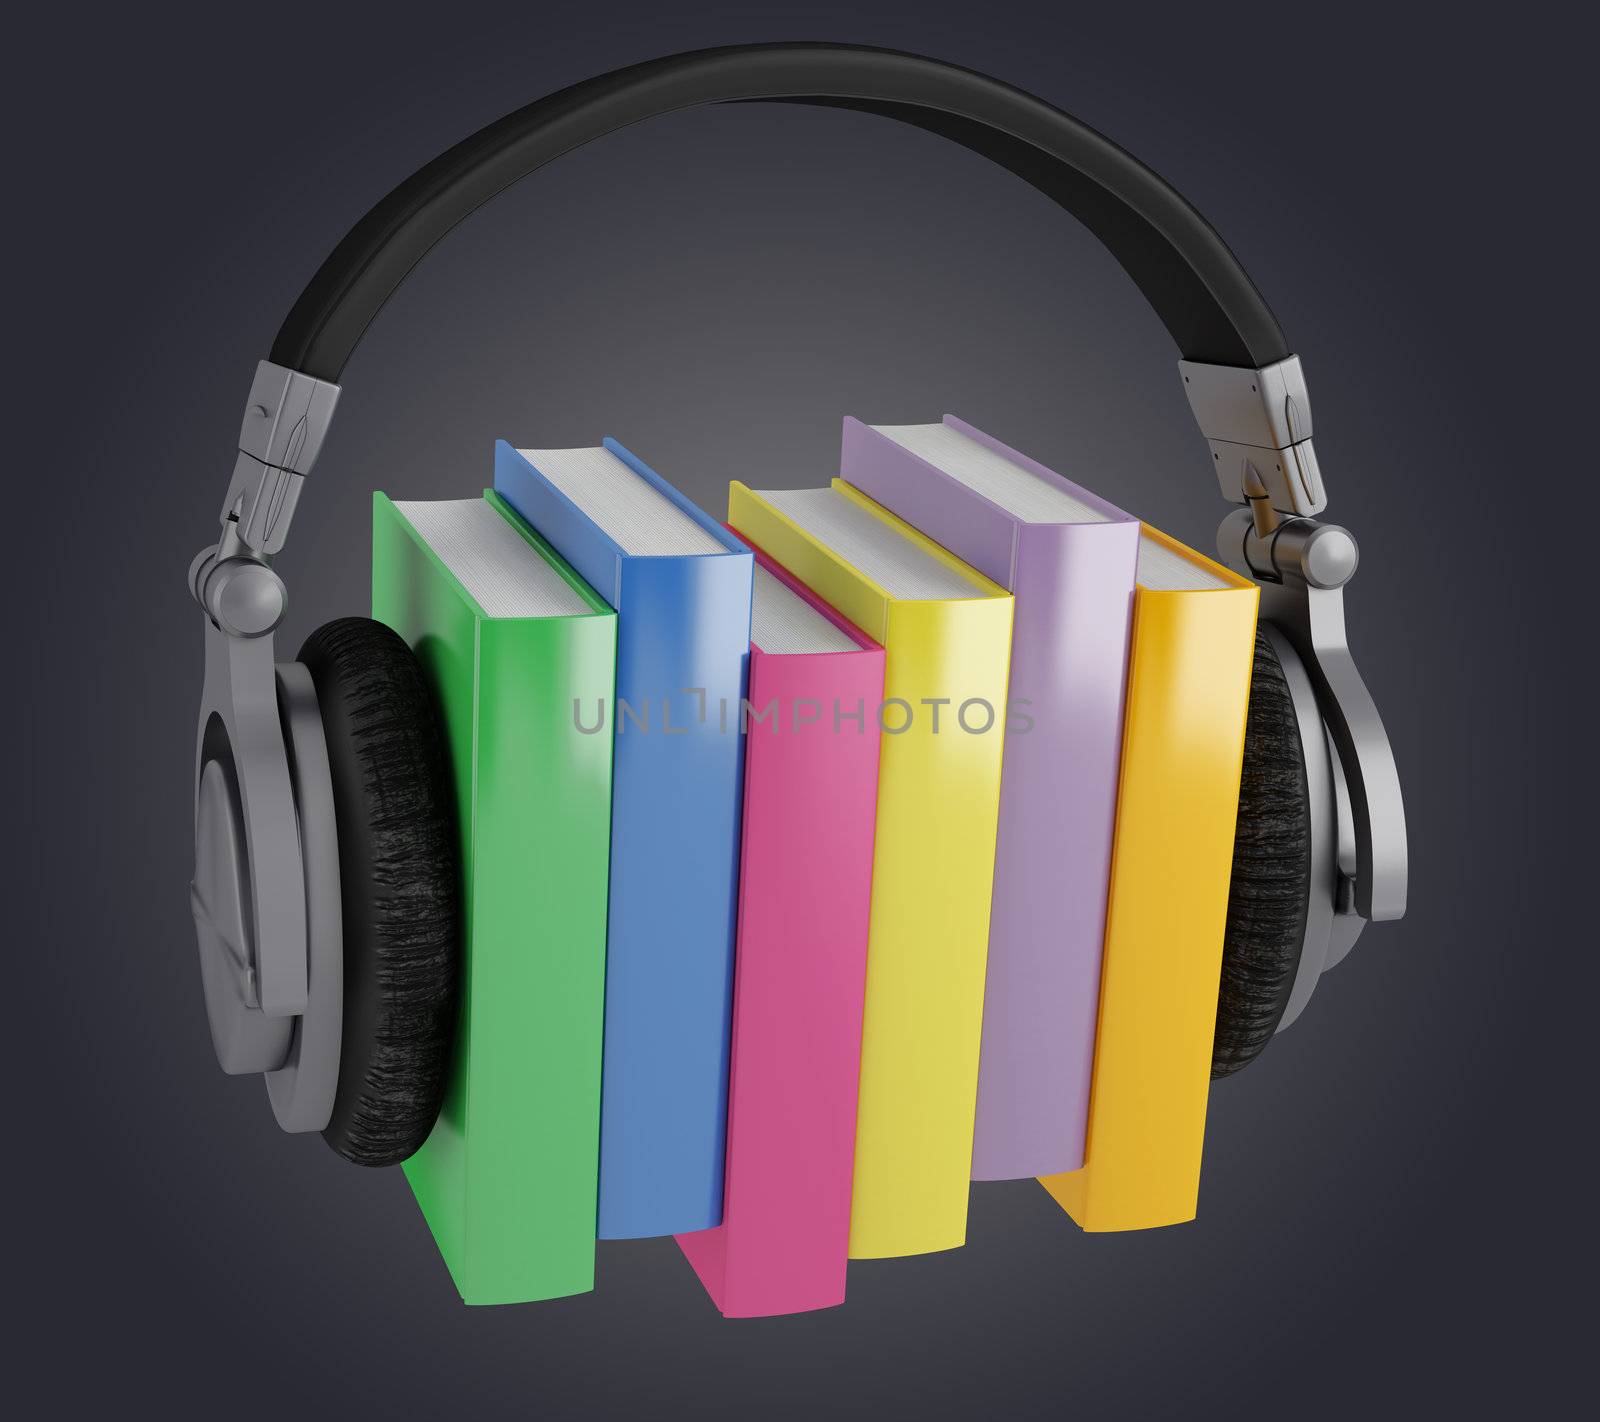 Headphones worn by the three colorful books